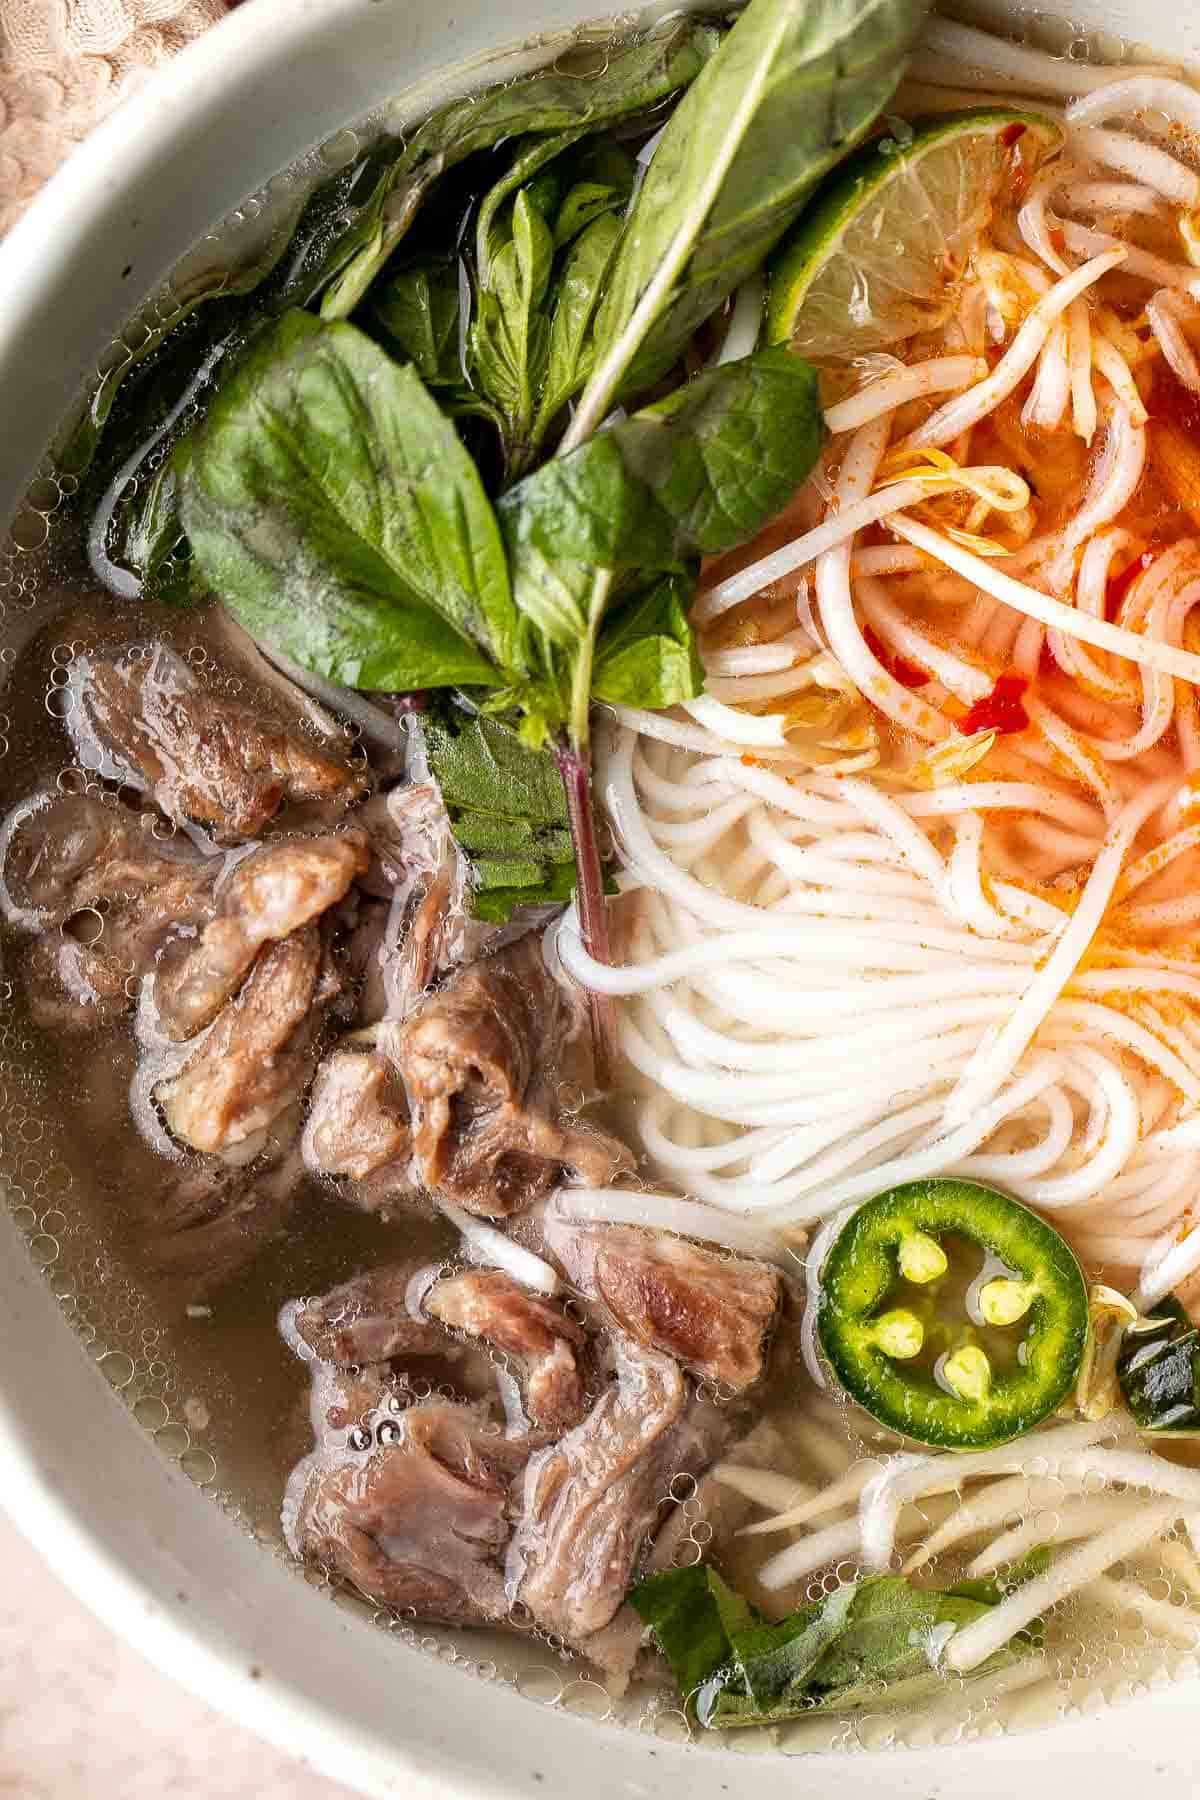 Vietnamese Pho is a one-of-a-kind soup known for its aromatic beef broth served over tender rice noodles, beef sirloin, fresh herbs, and other garnishes. | aheadofthyme.com